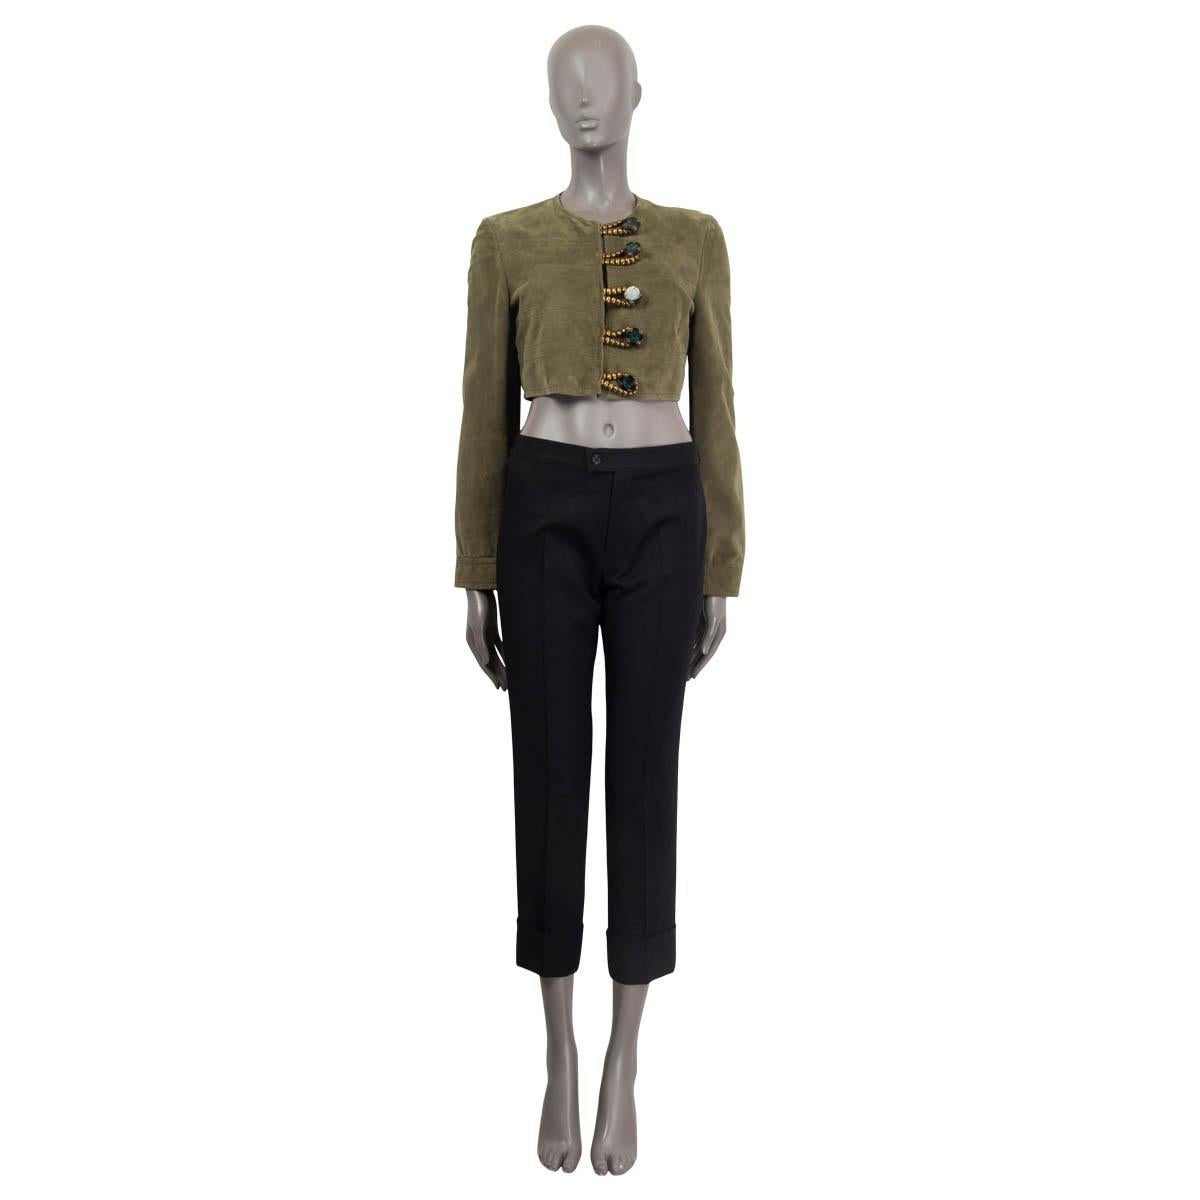 100% authentic Etro cropped jacket in green goatskin suede. Features buttoned cuffs and a round neck. Opens with five big metal button loops and emerald green buttons. Lined in multi colored paisley printed silk (100%). Has been worn and is in